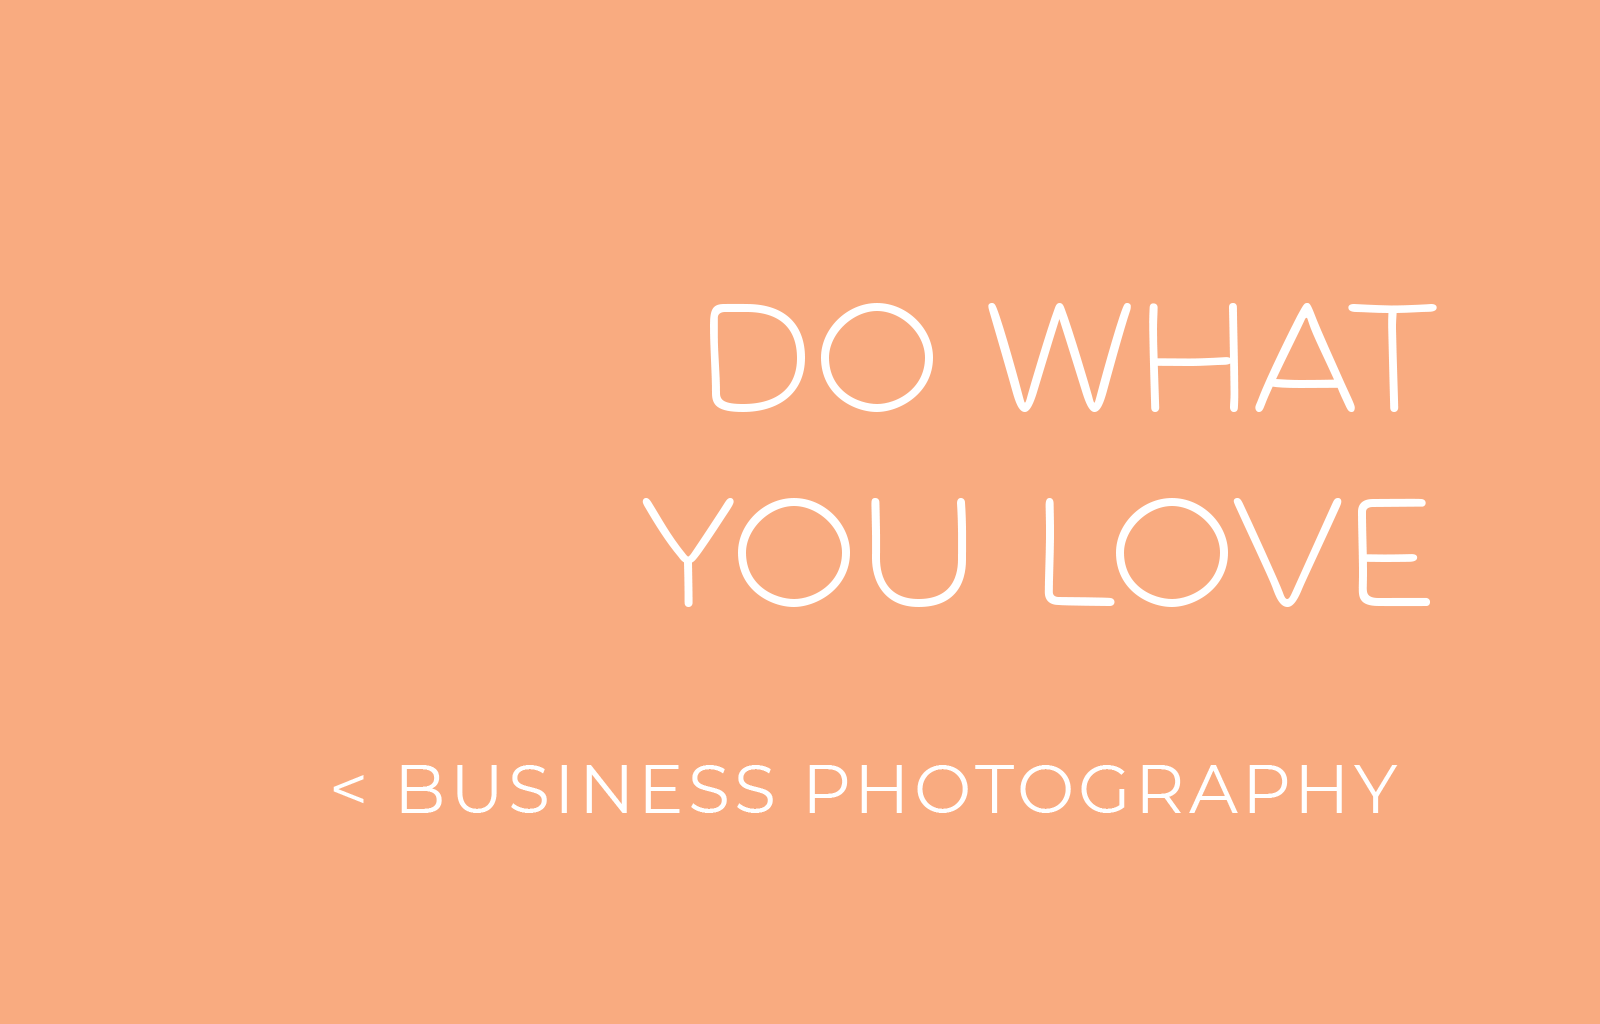 DO WHAT YOU LOVE < BUSINESS PHOTOGRAPHY